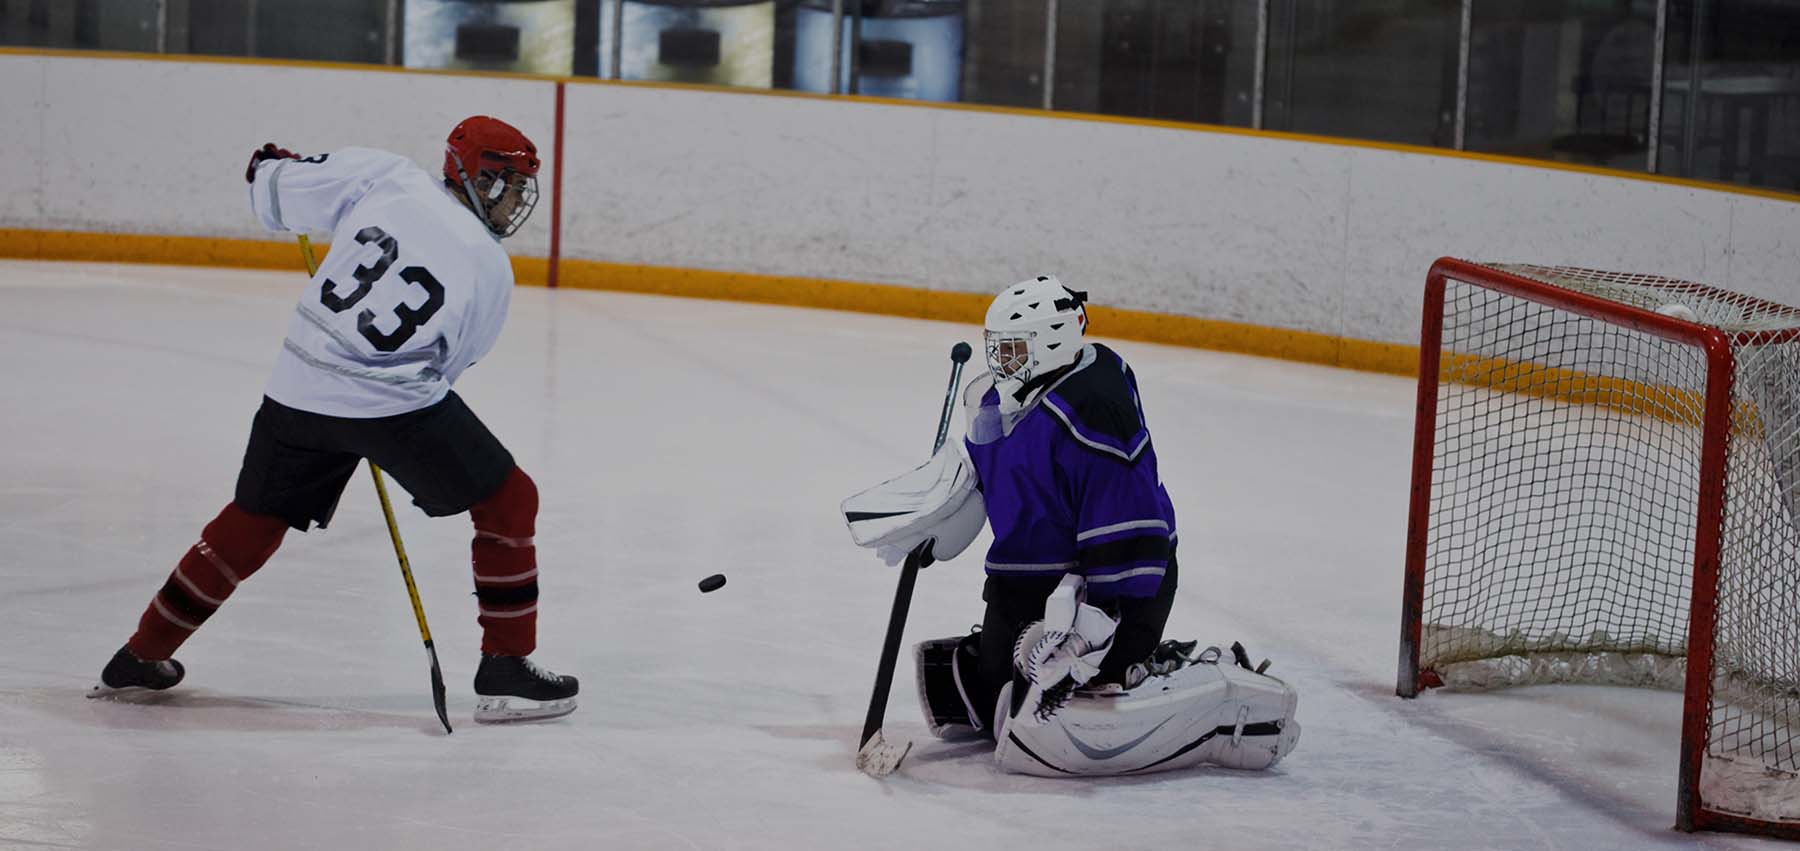 An ice hockey player takes a shot at a stopper